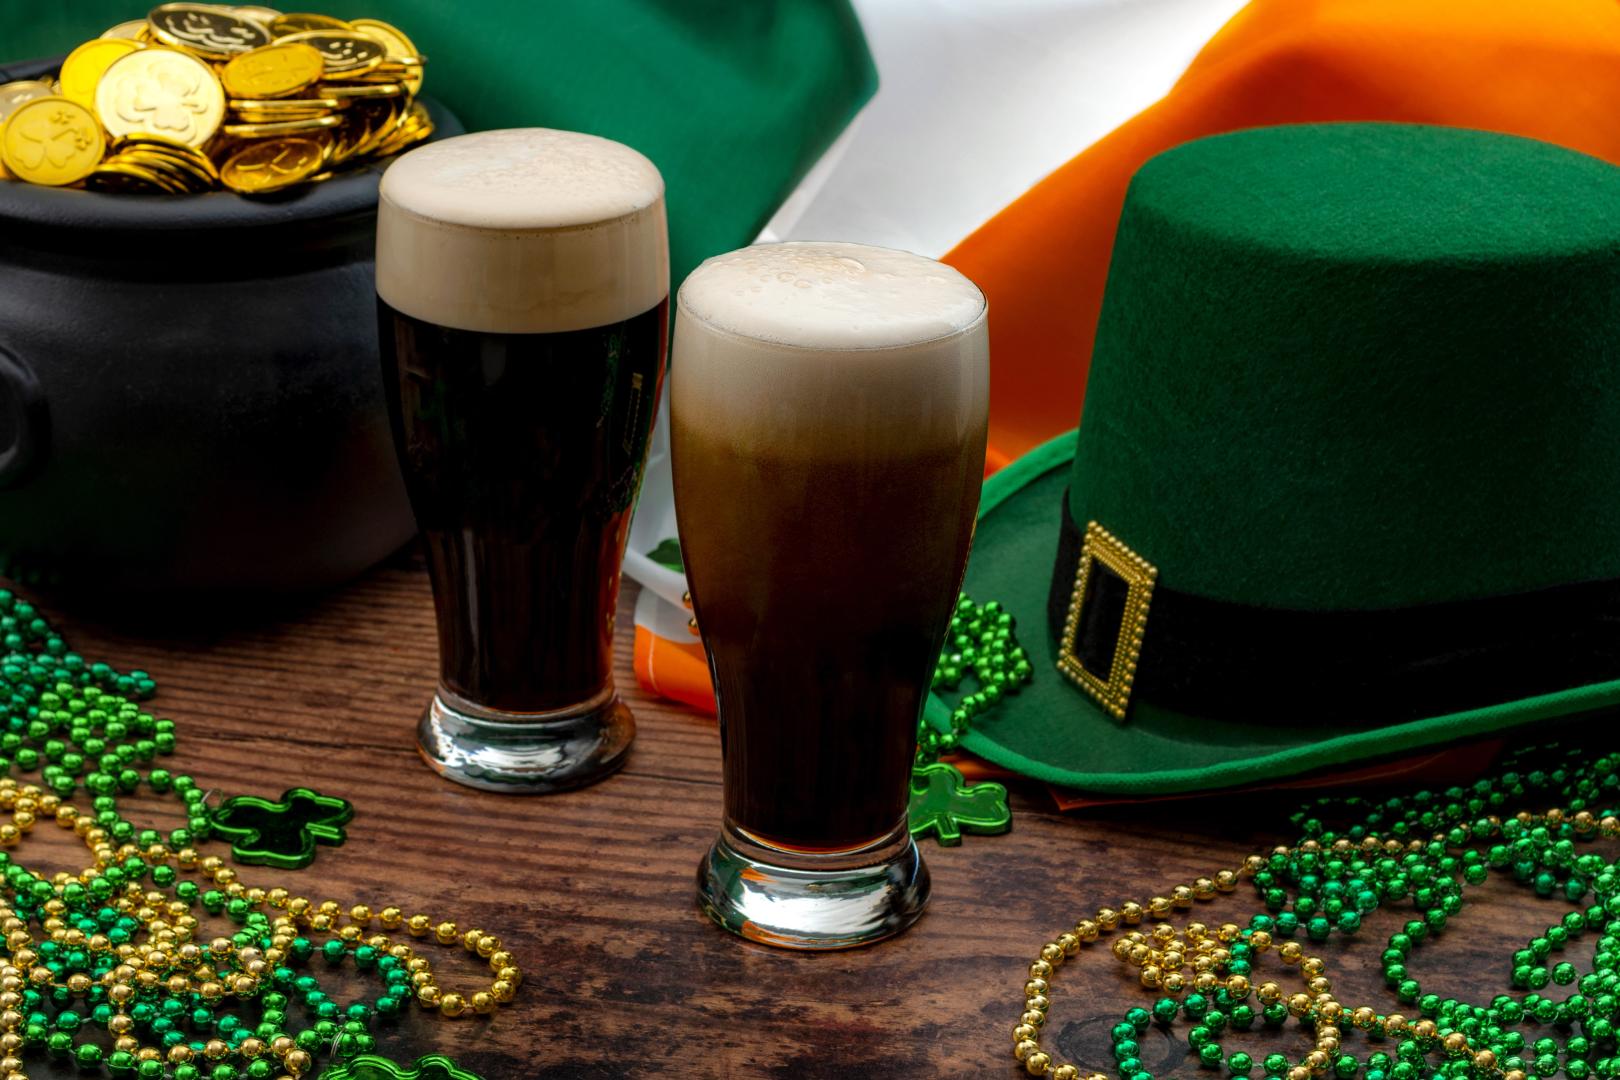 Raise Your Glass to St. Patrick's Day